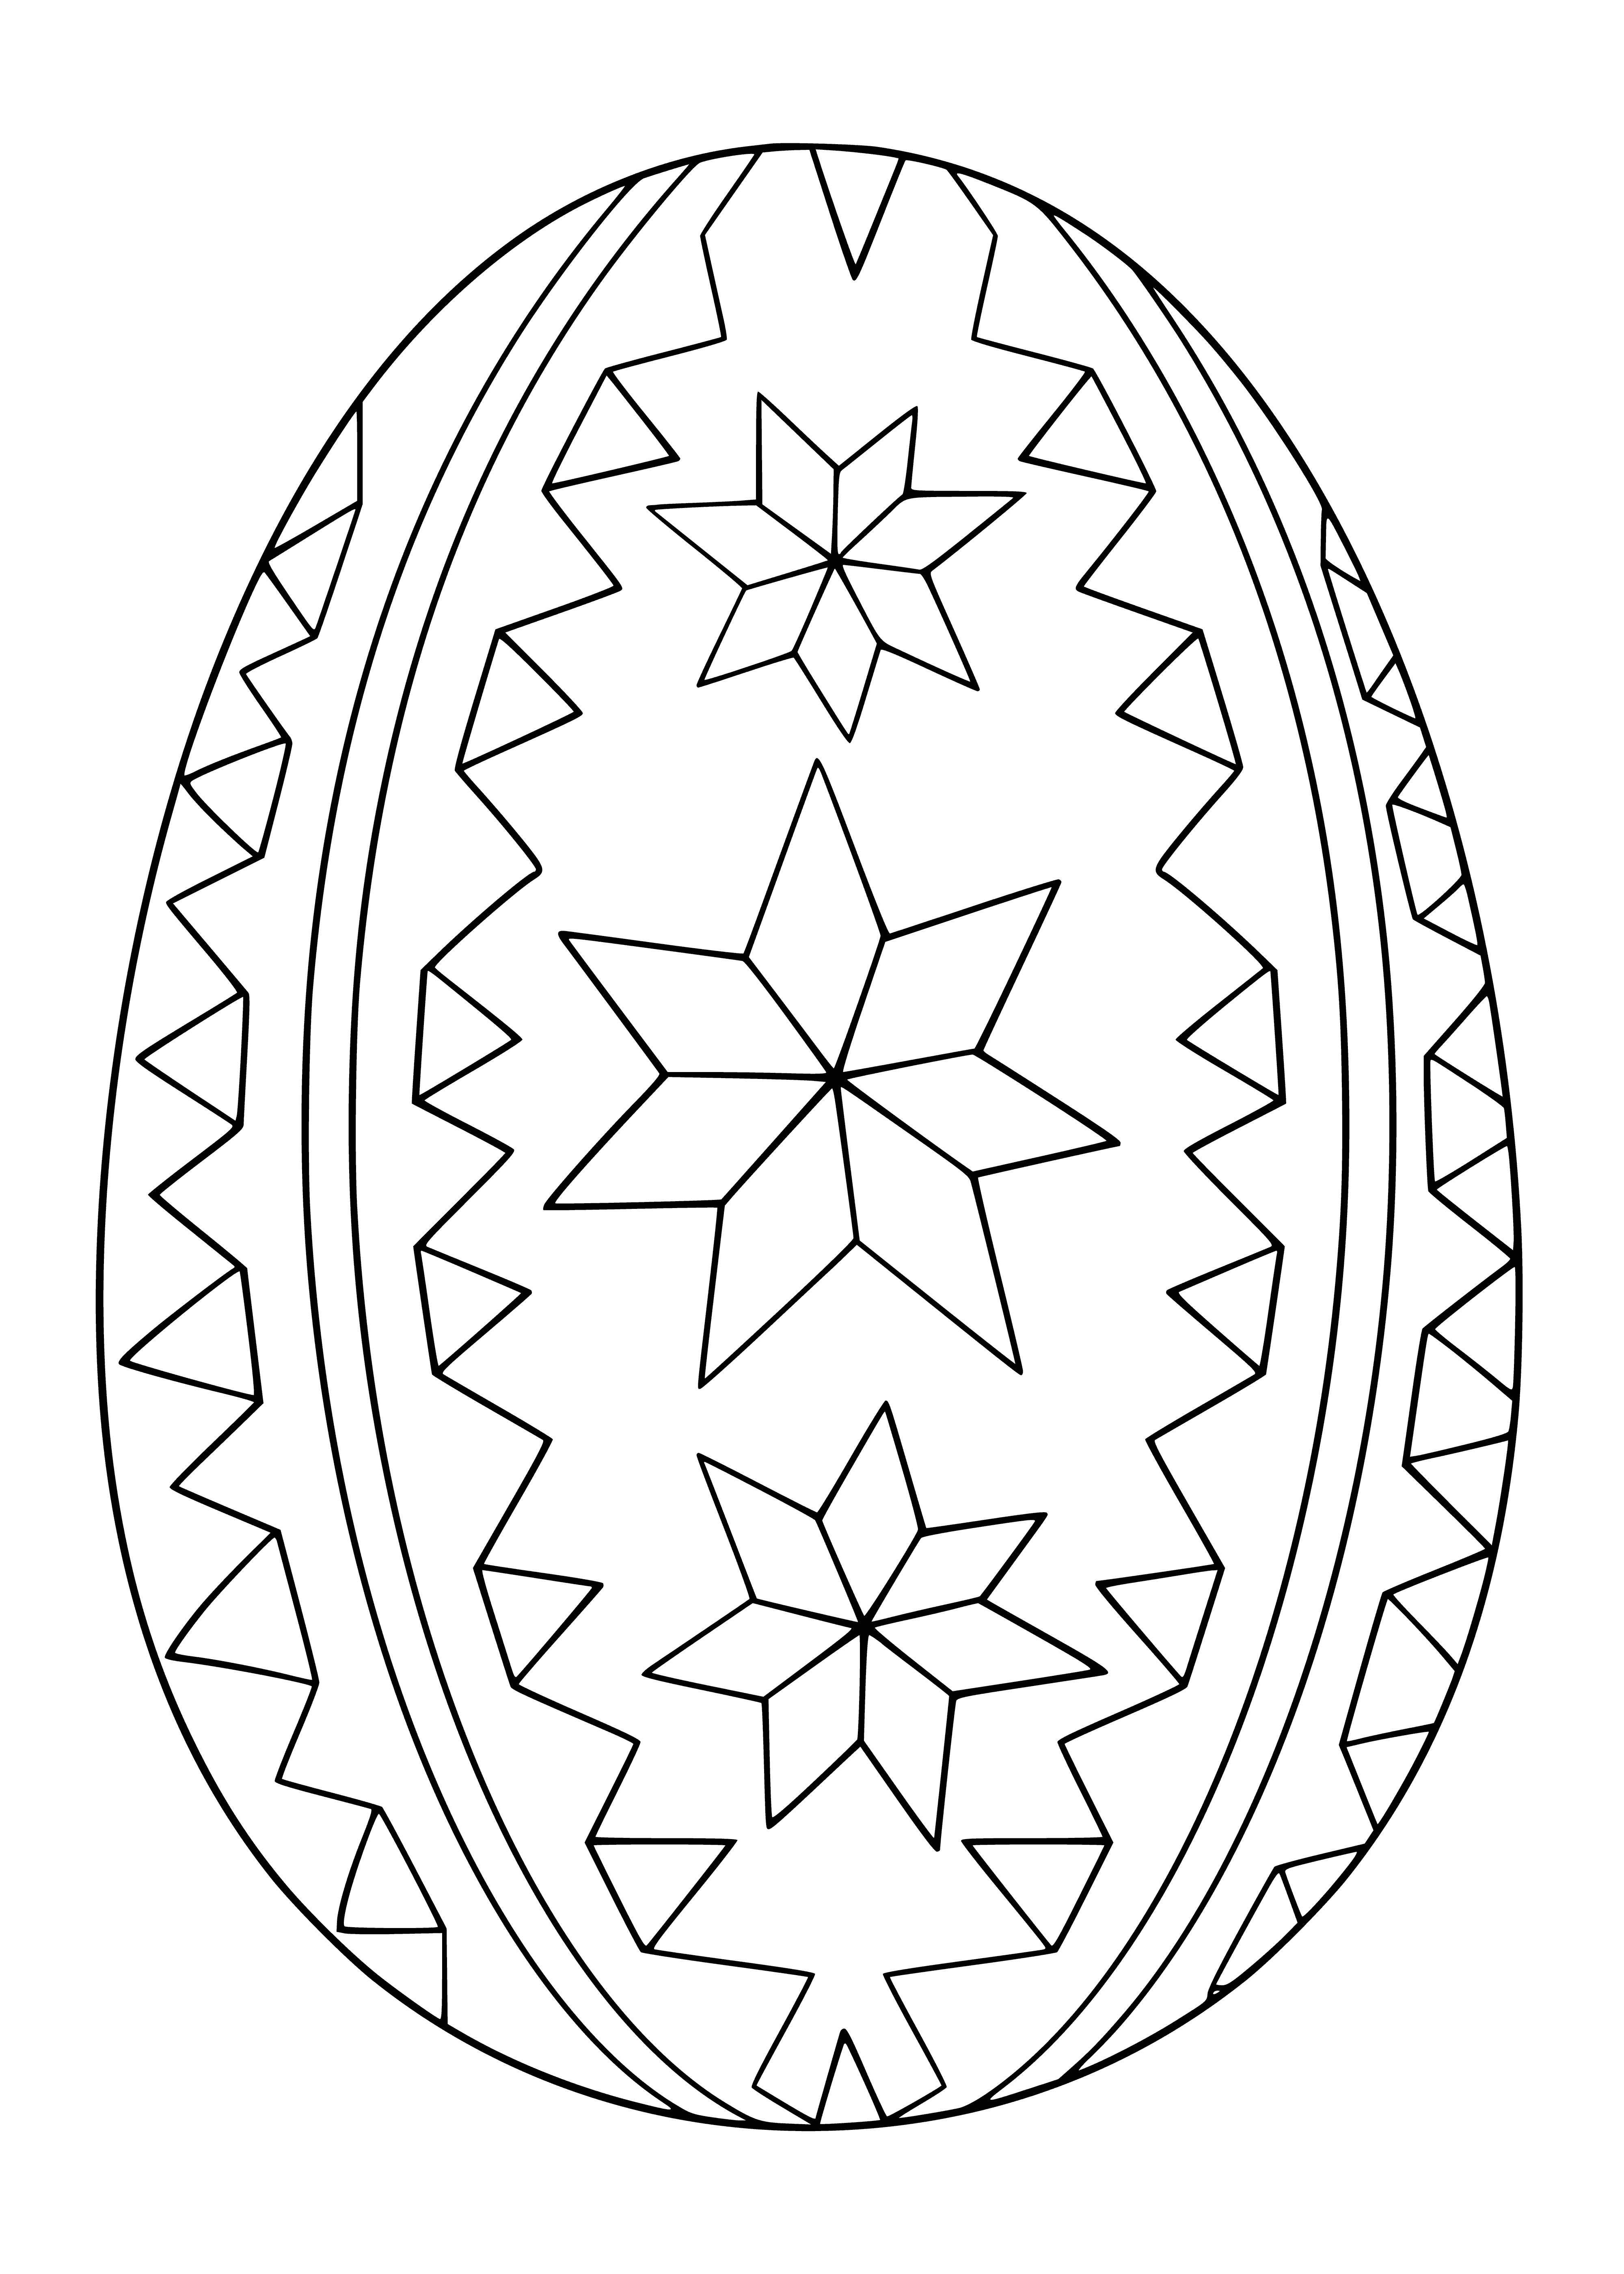 coloring page: Egg painted light blue with flowers & bunny decorating the shell.